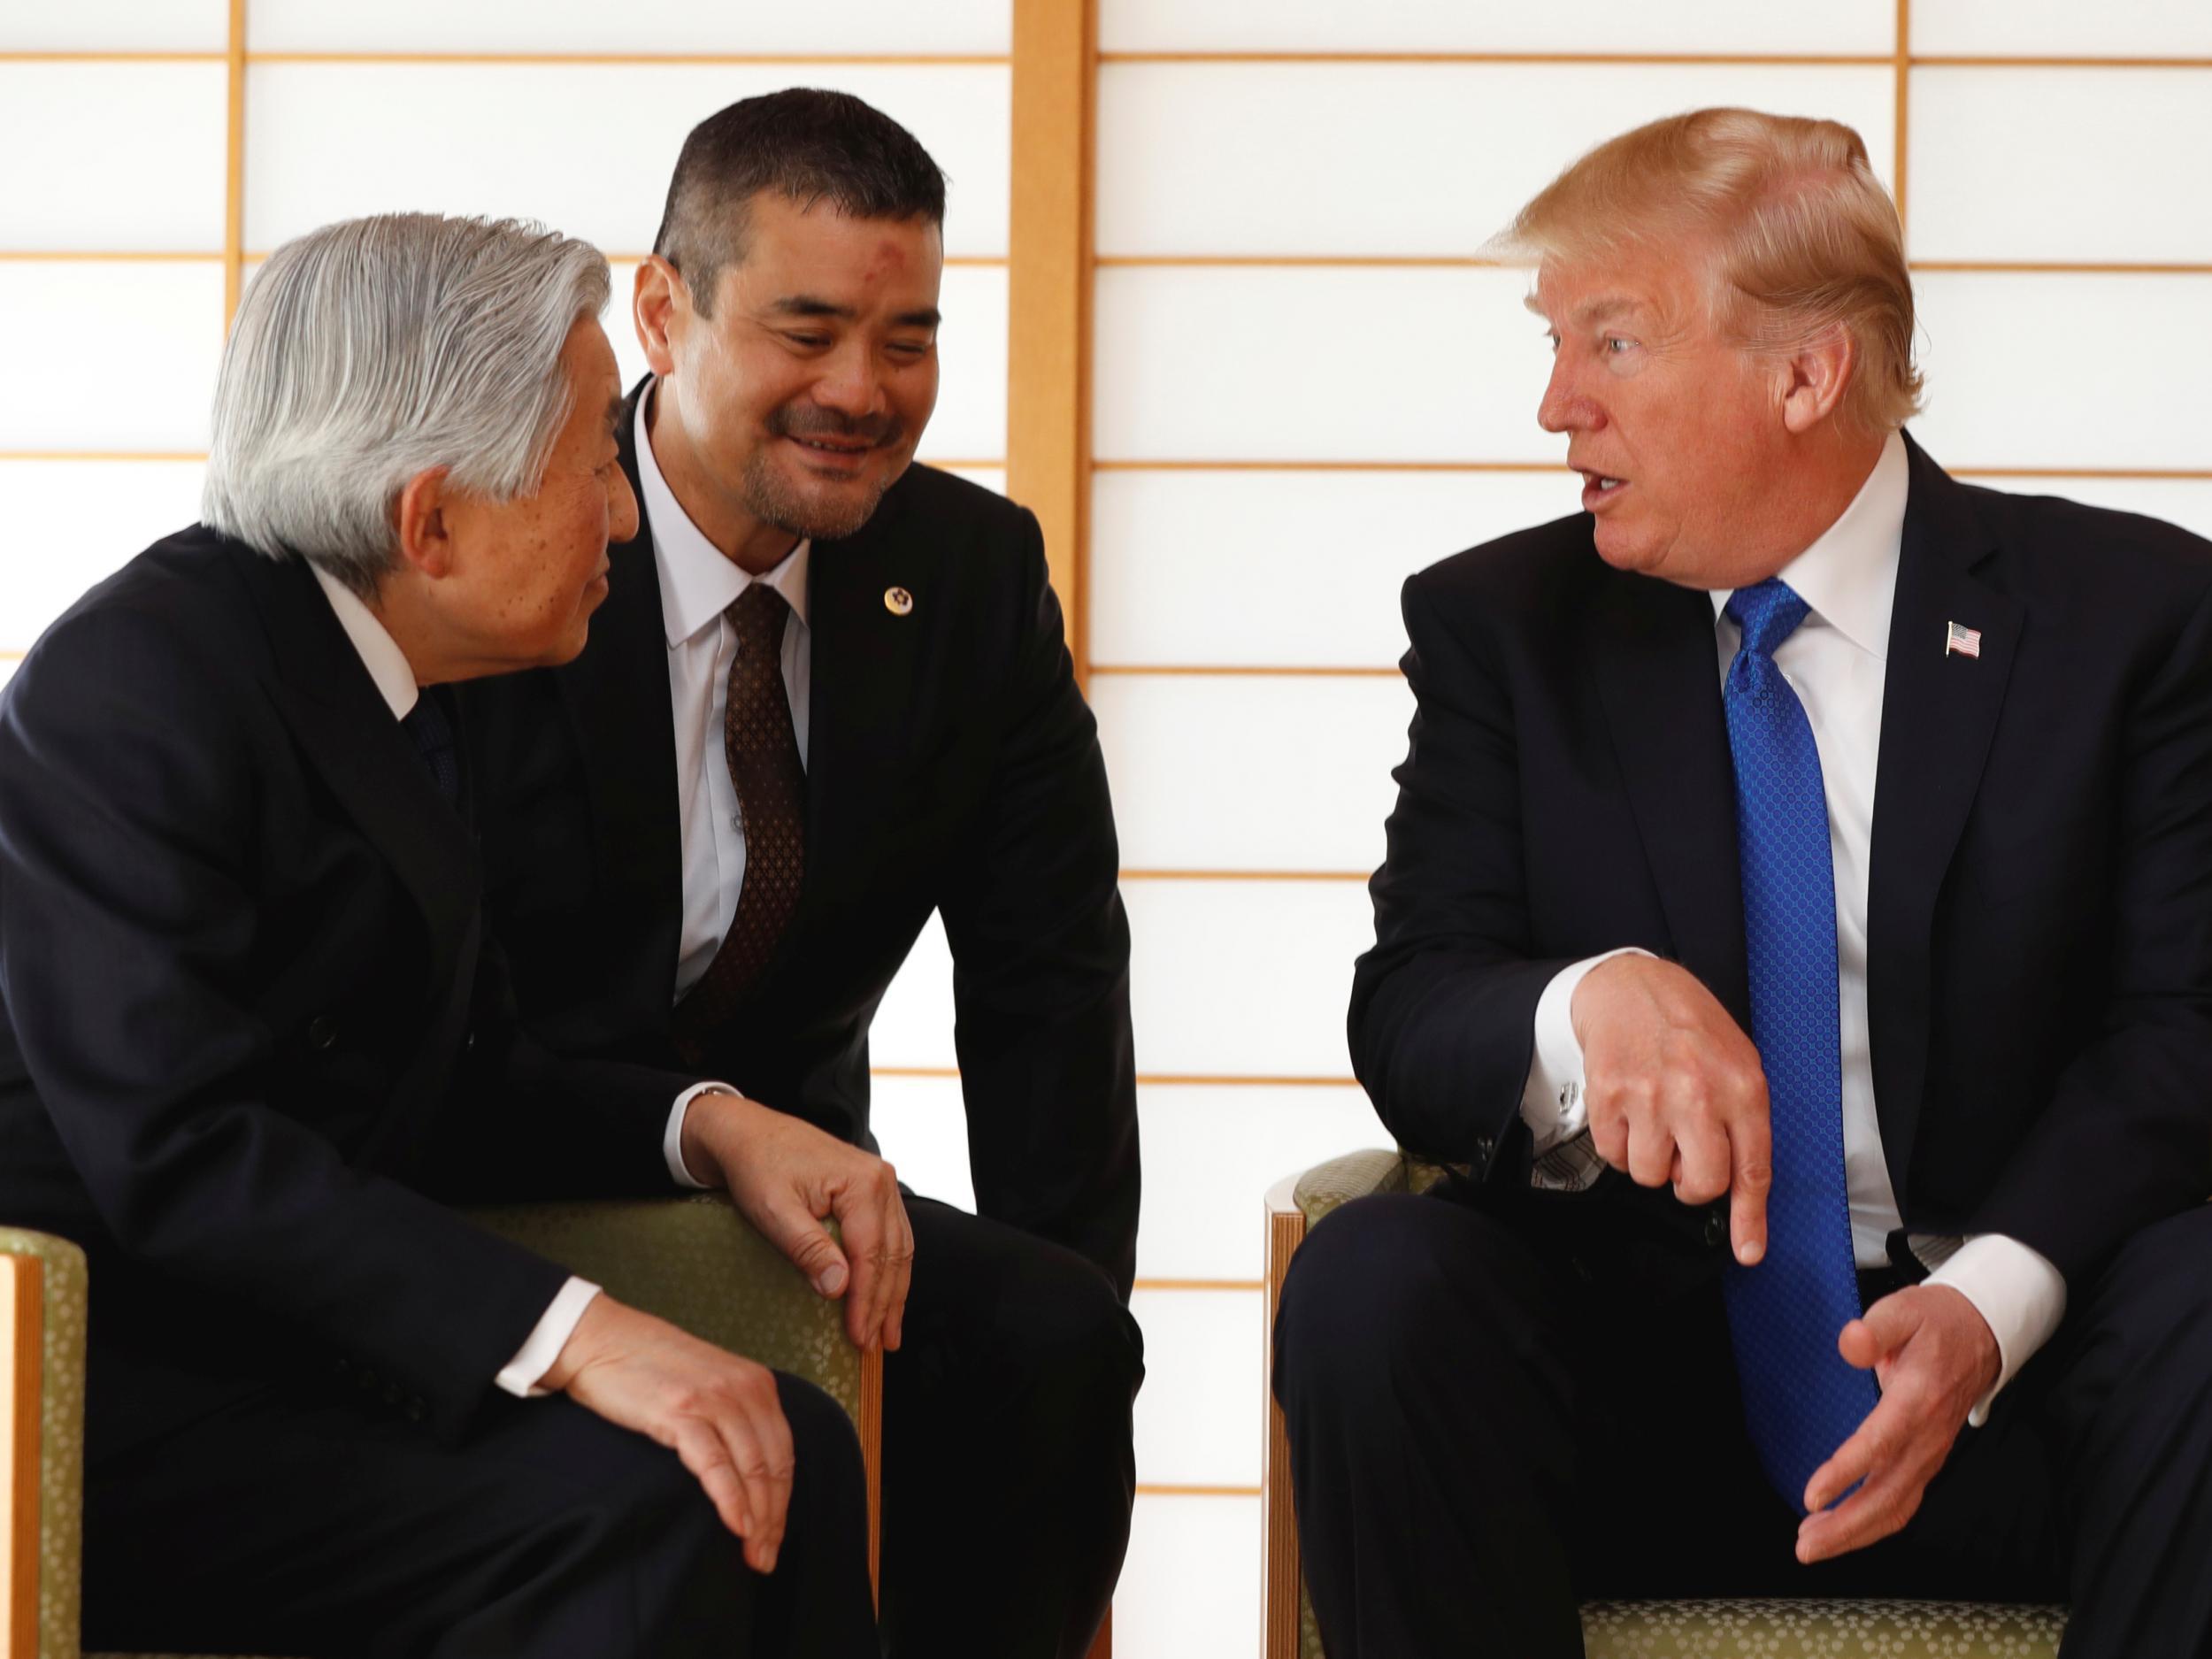 President Donald Trump talks with Japan's Emperor Akihito during their meeting at the Imperial Palace in Tokyo